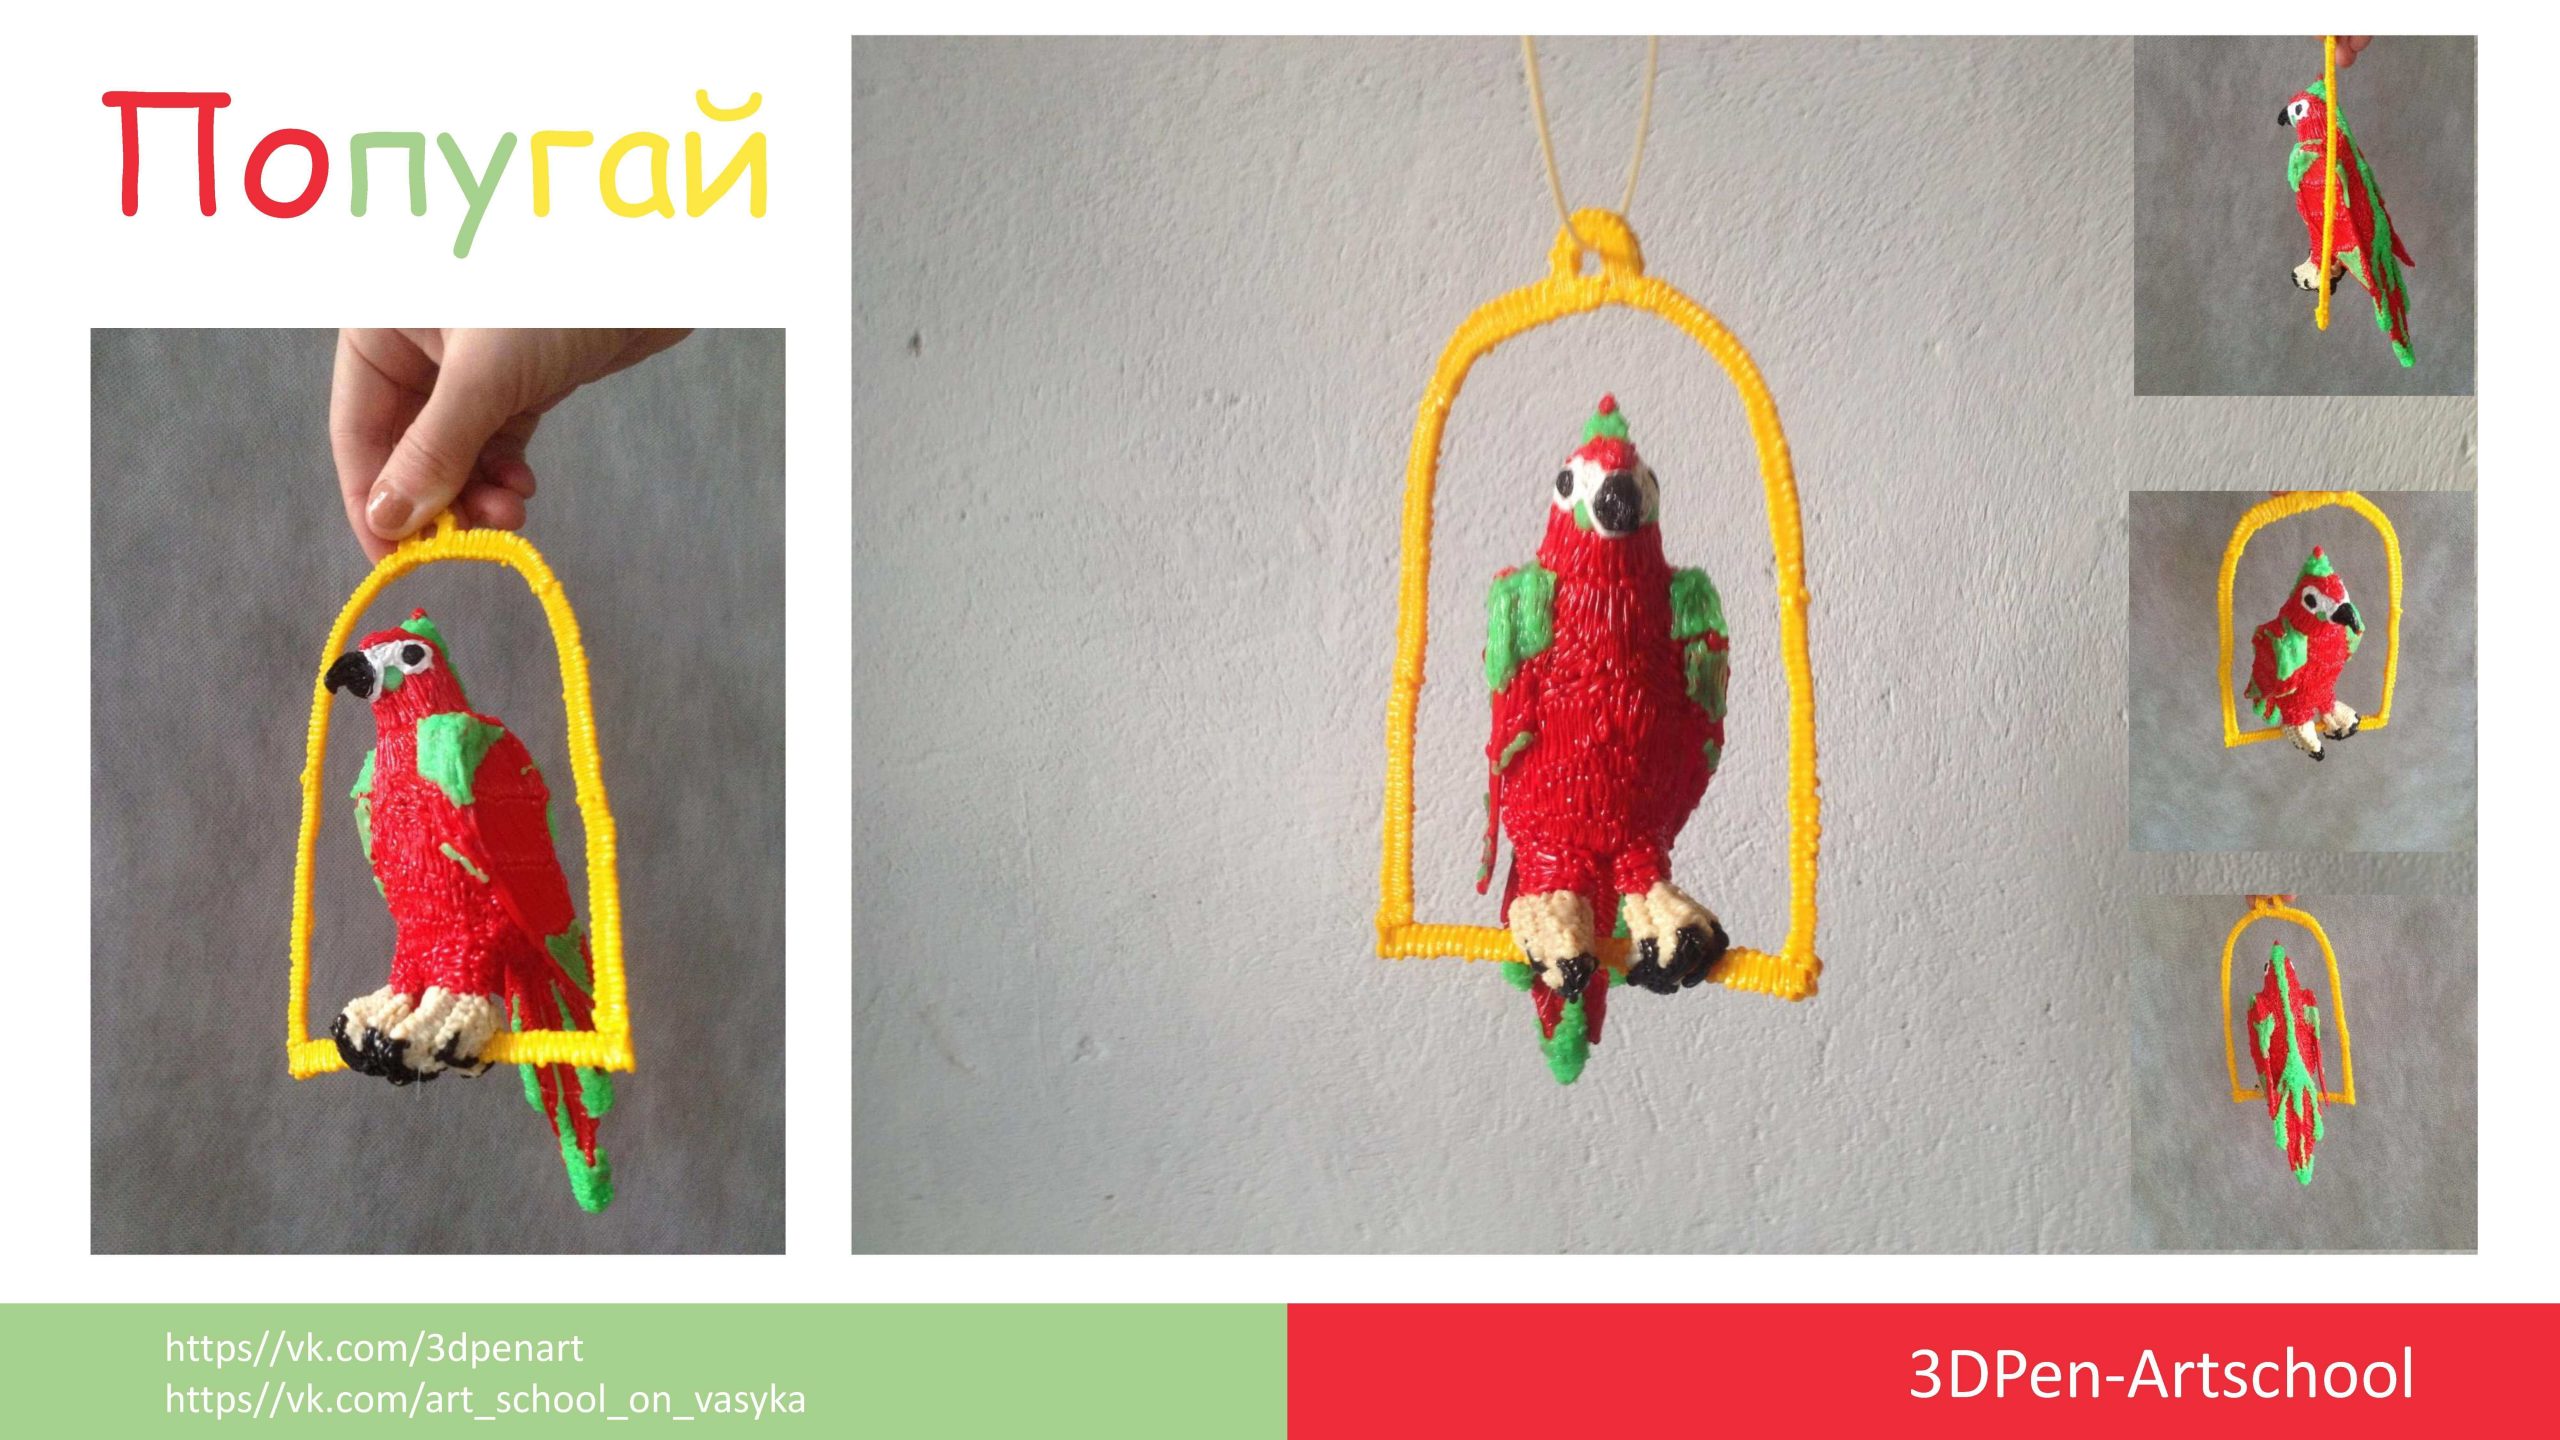 How to create a 3D parrot?